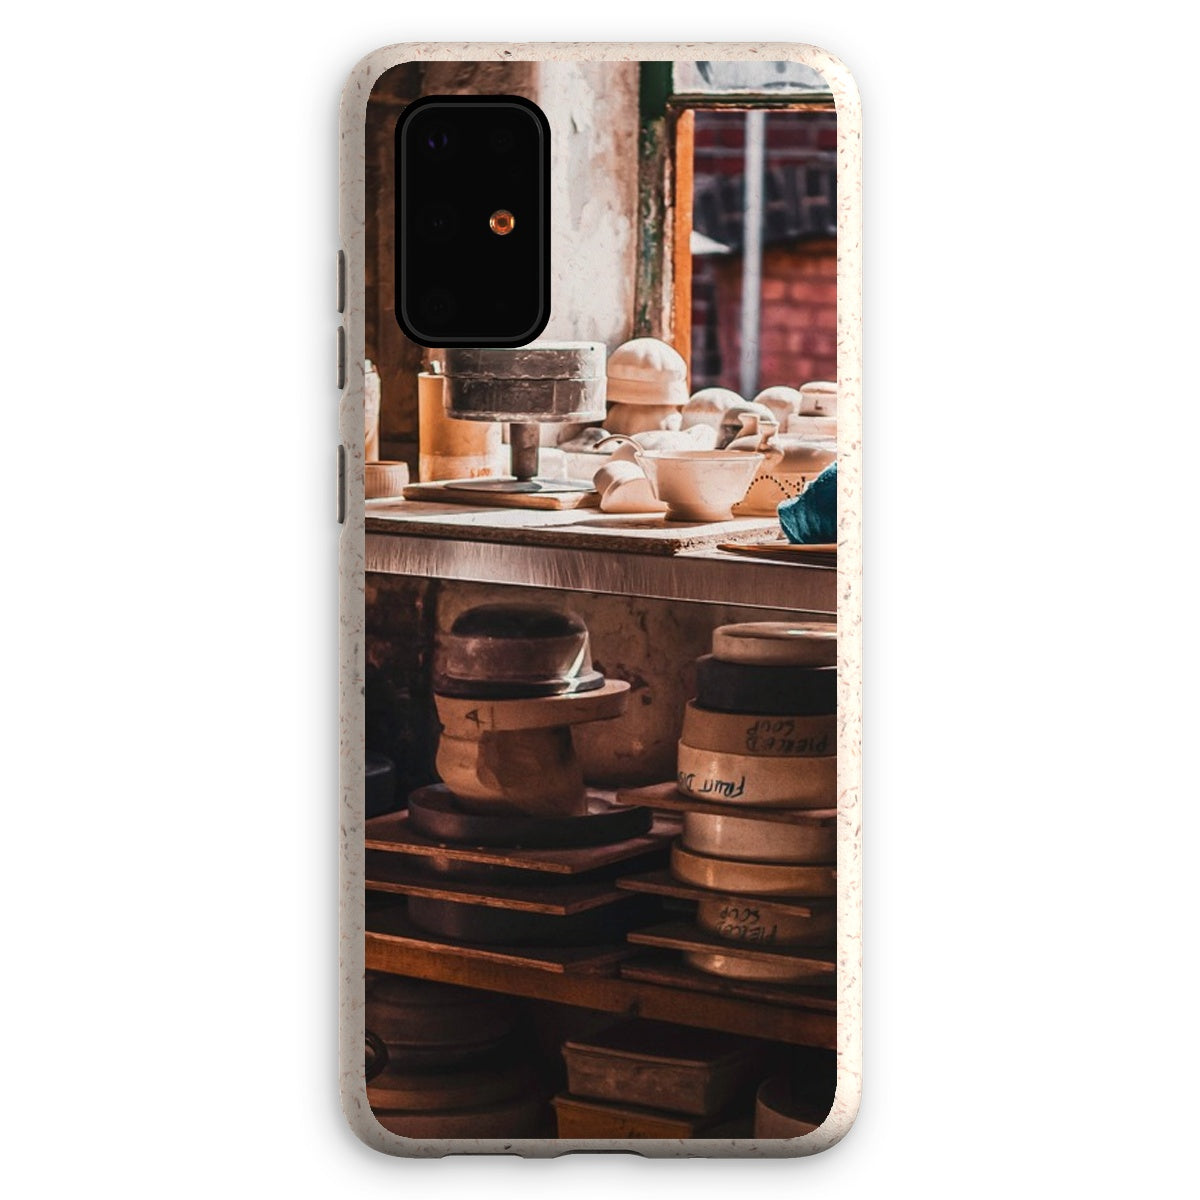 The Potter's Craft Eco Phone Case